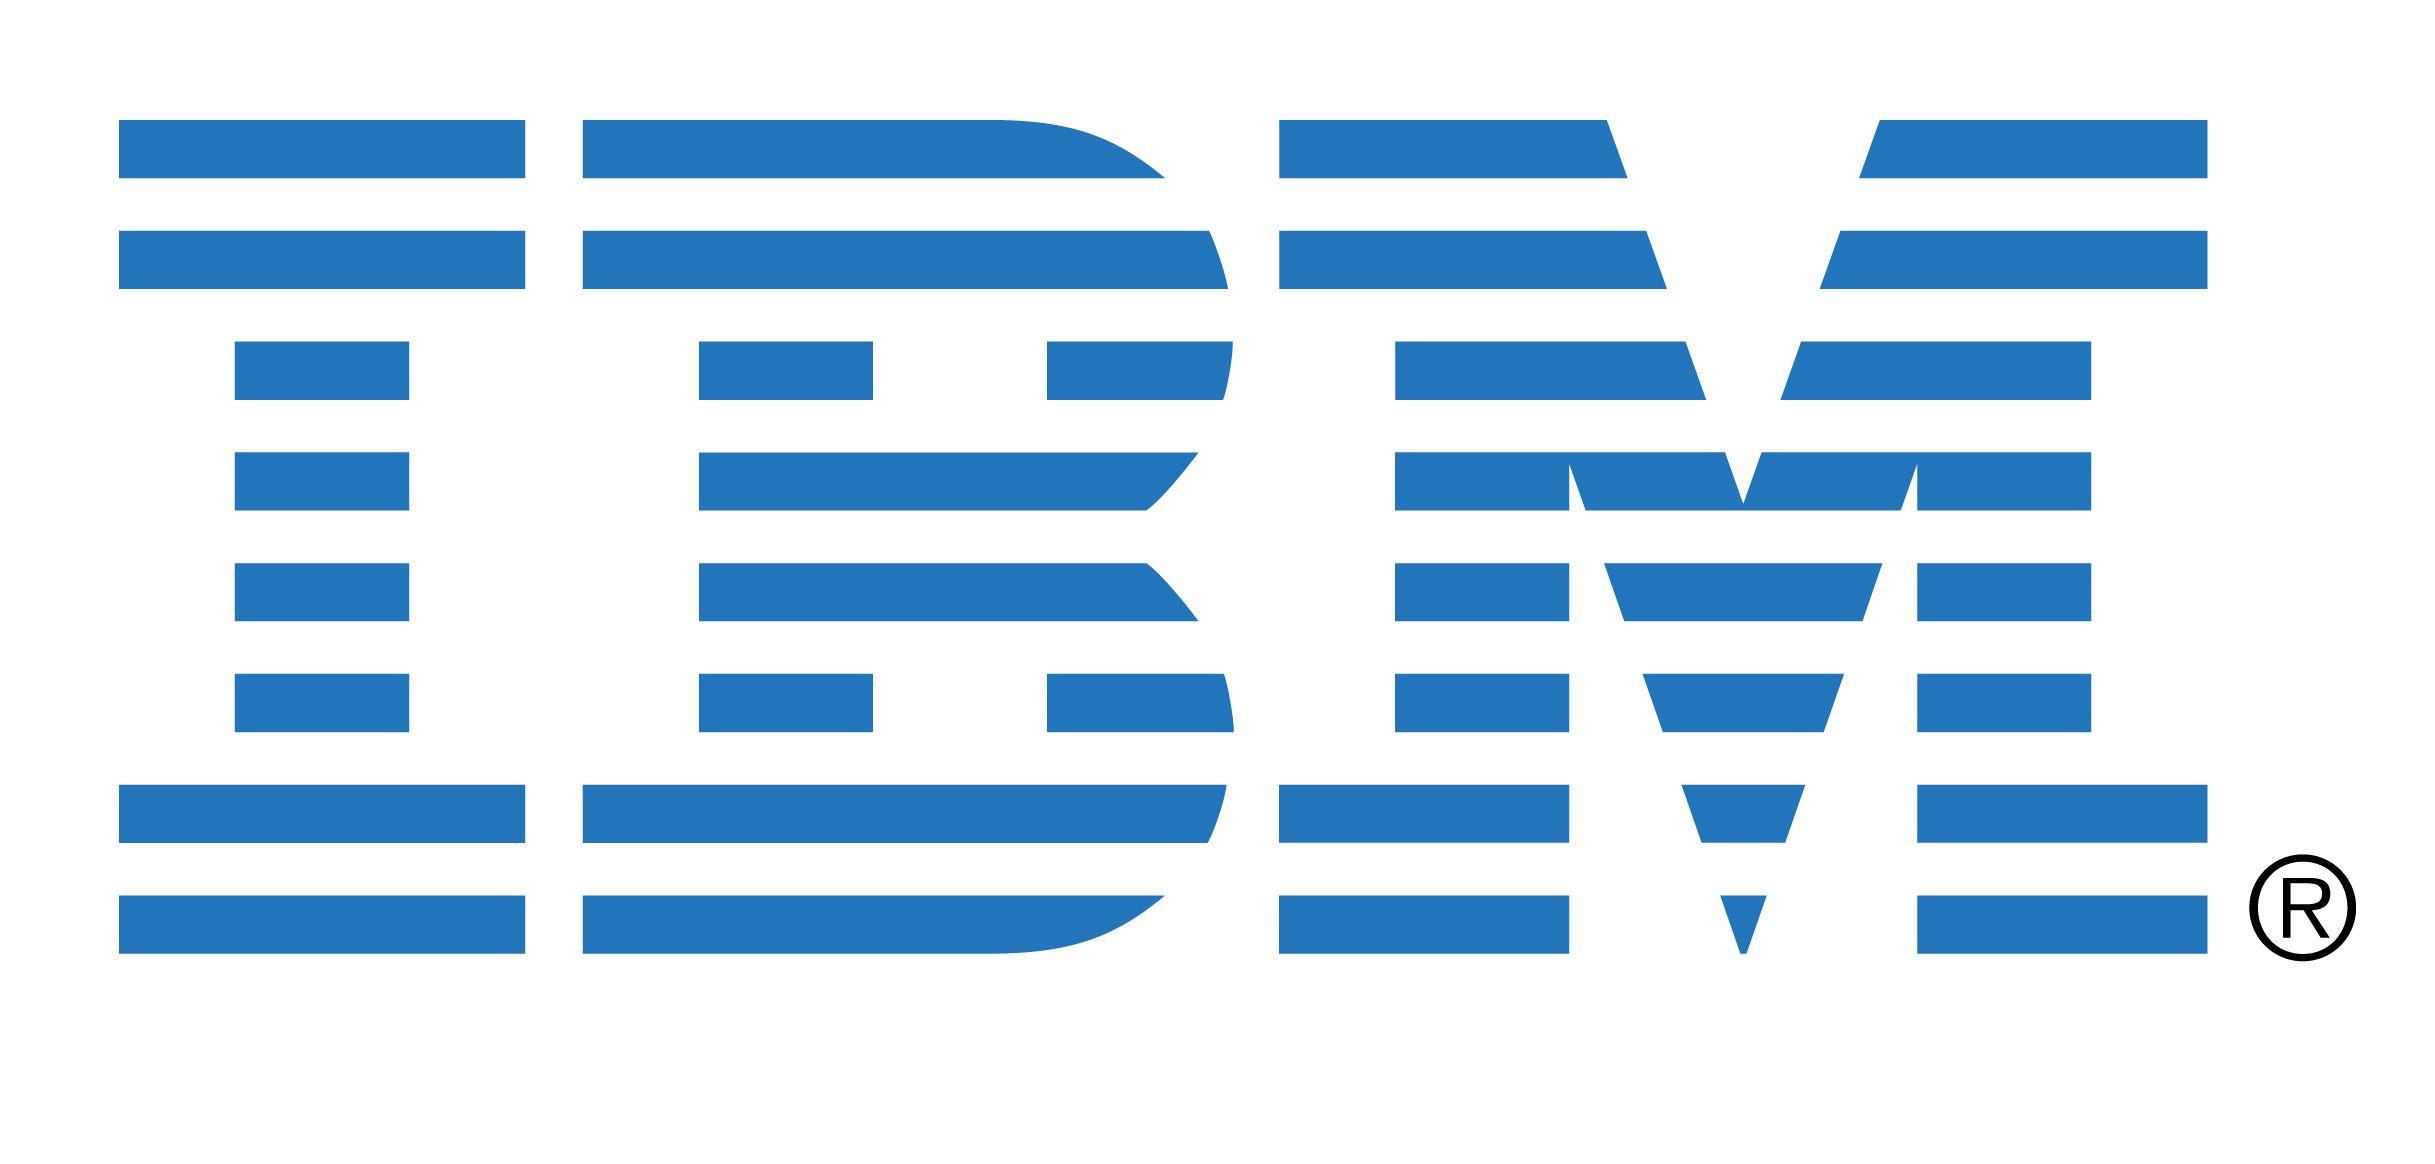 IBM Company Logo - Should Investors Be Worried About IBM's Mountain of Debt?